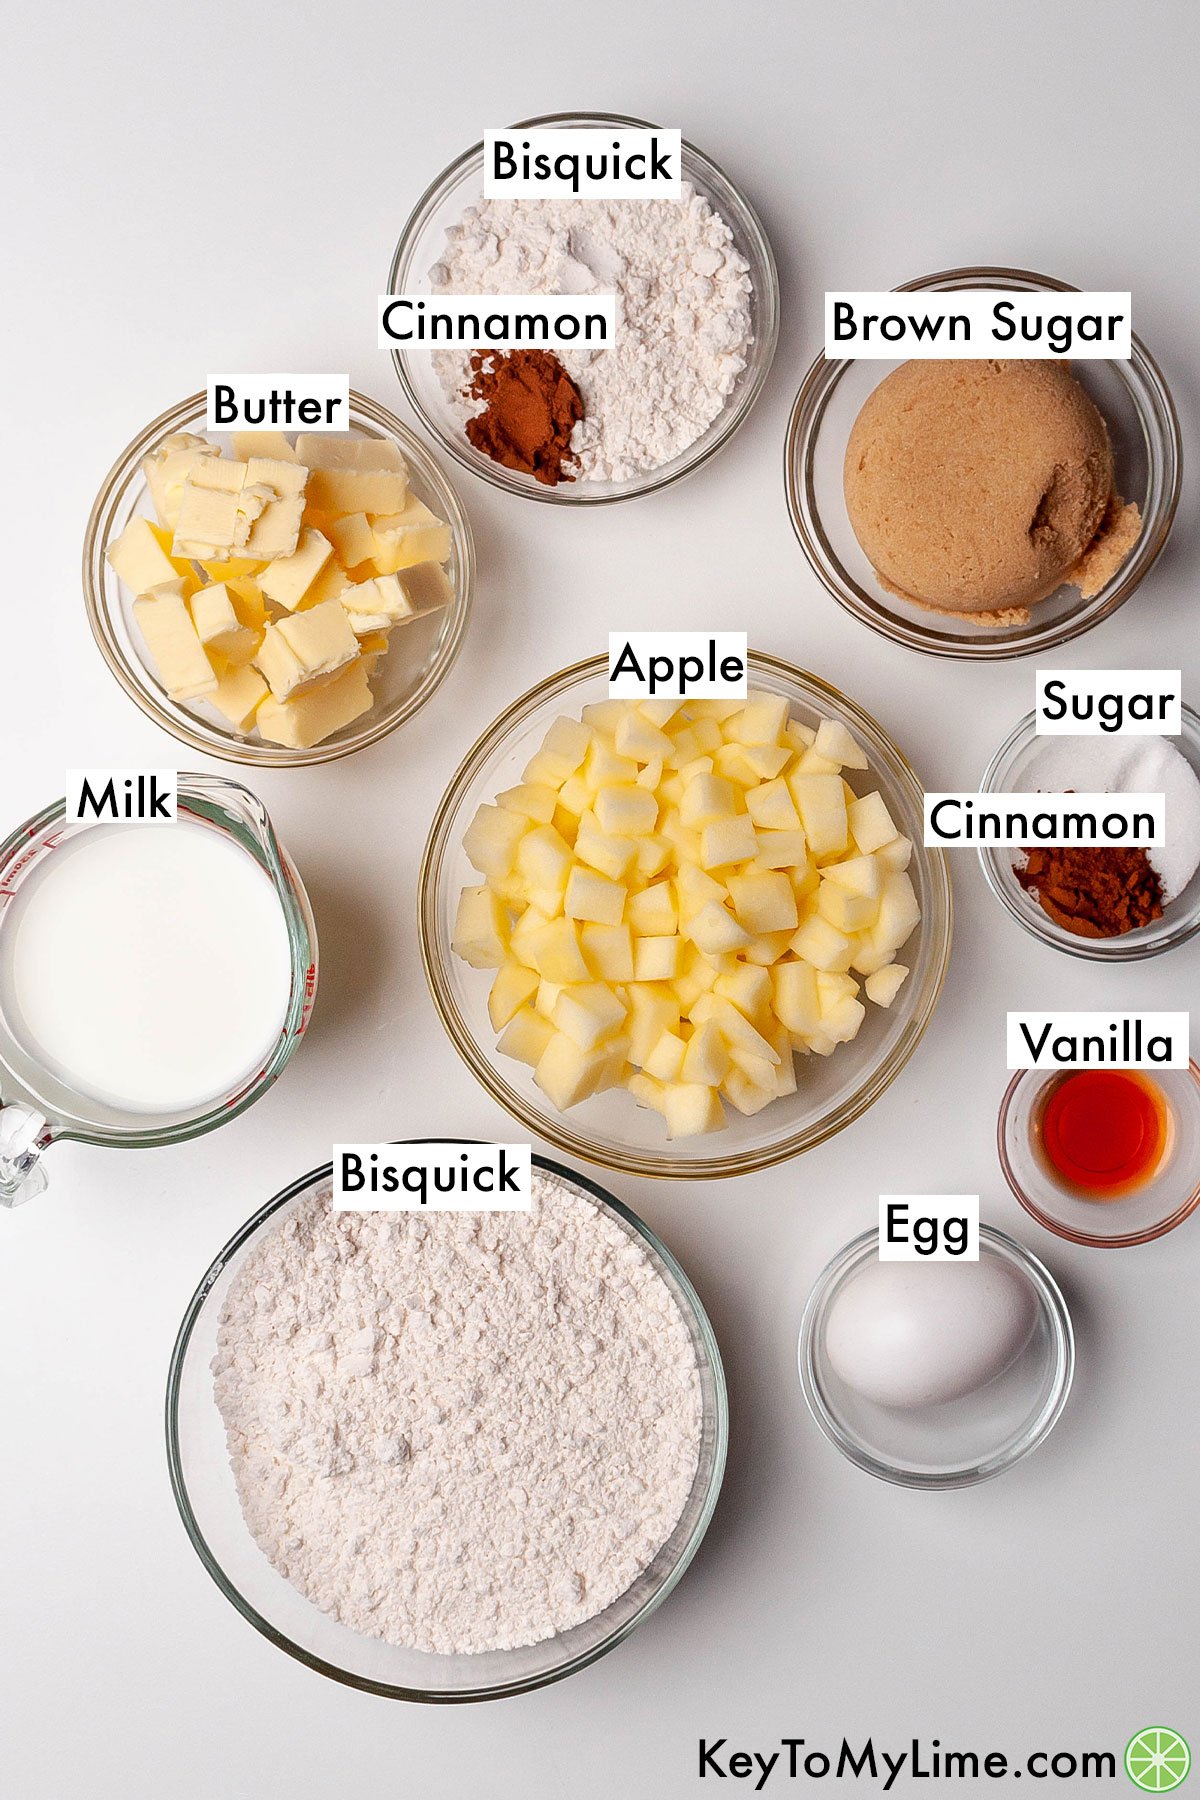 The labeled ingredients for Bisquick coffee cake.